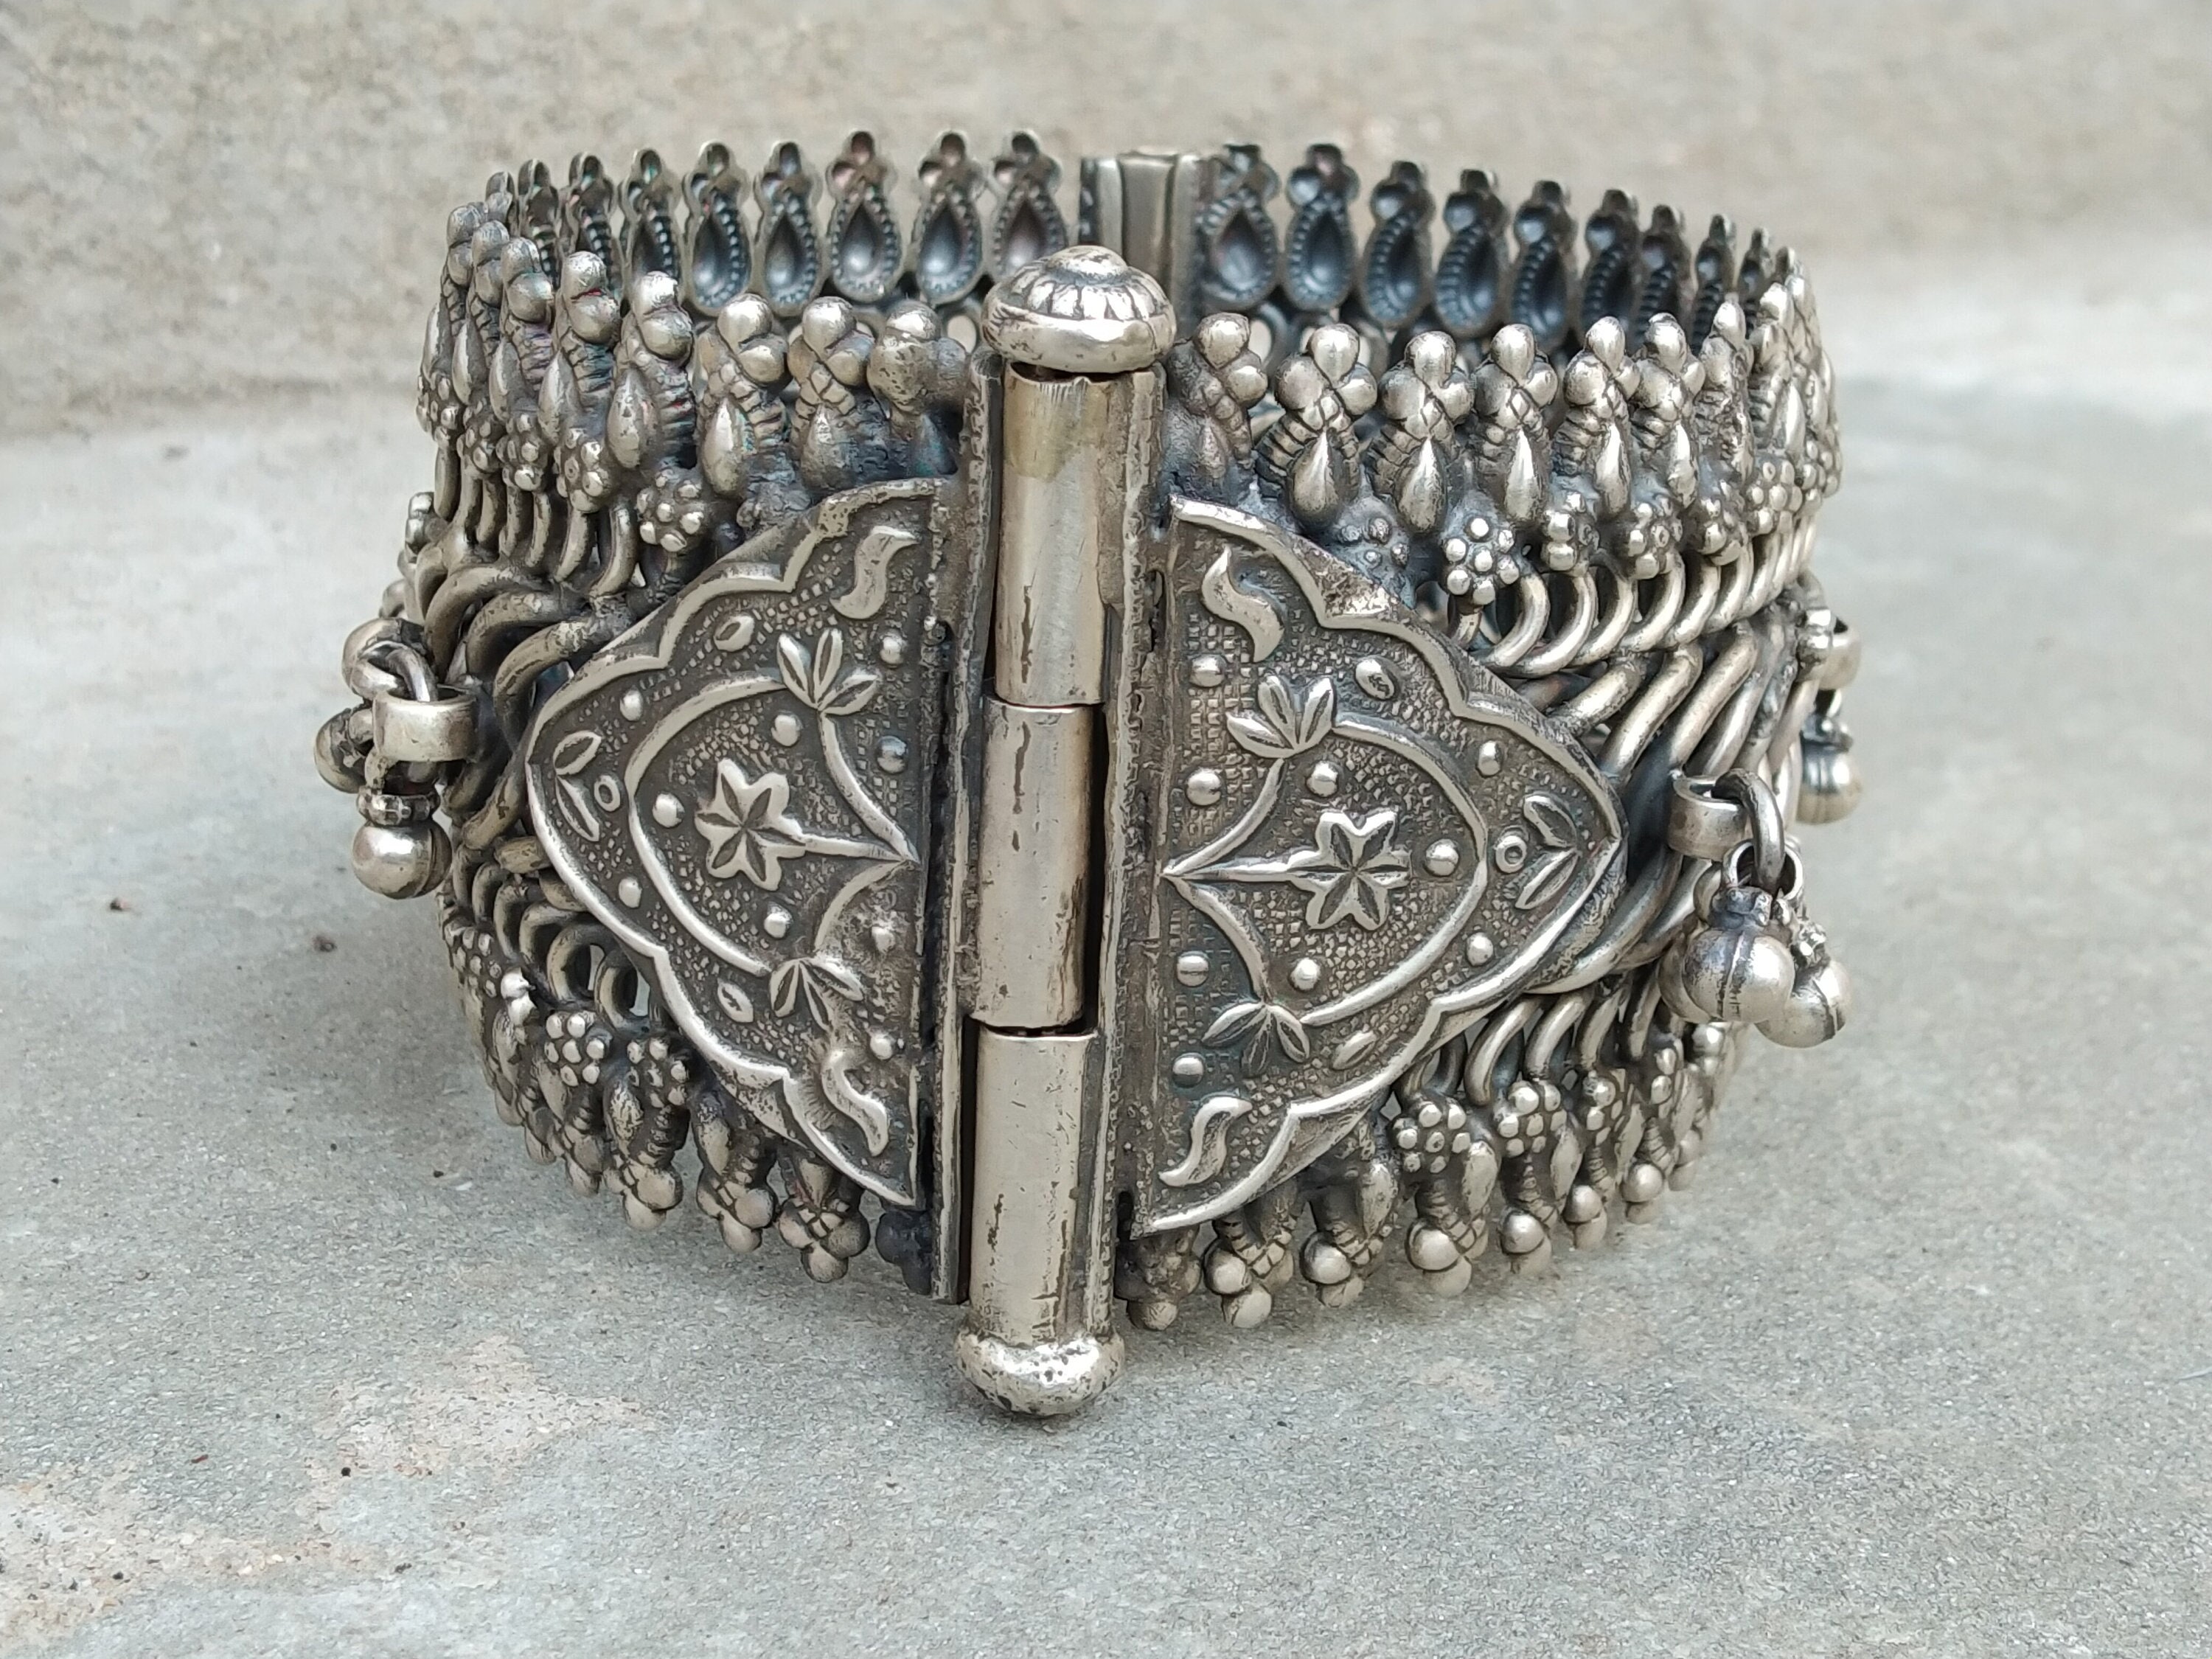 Antique Silver Upper Arm Bracelet from Rajasthan, India – Anteeka